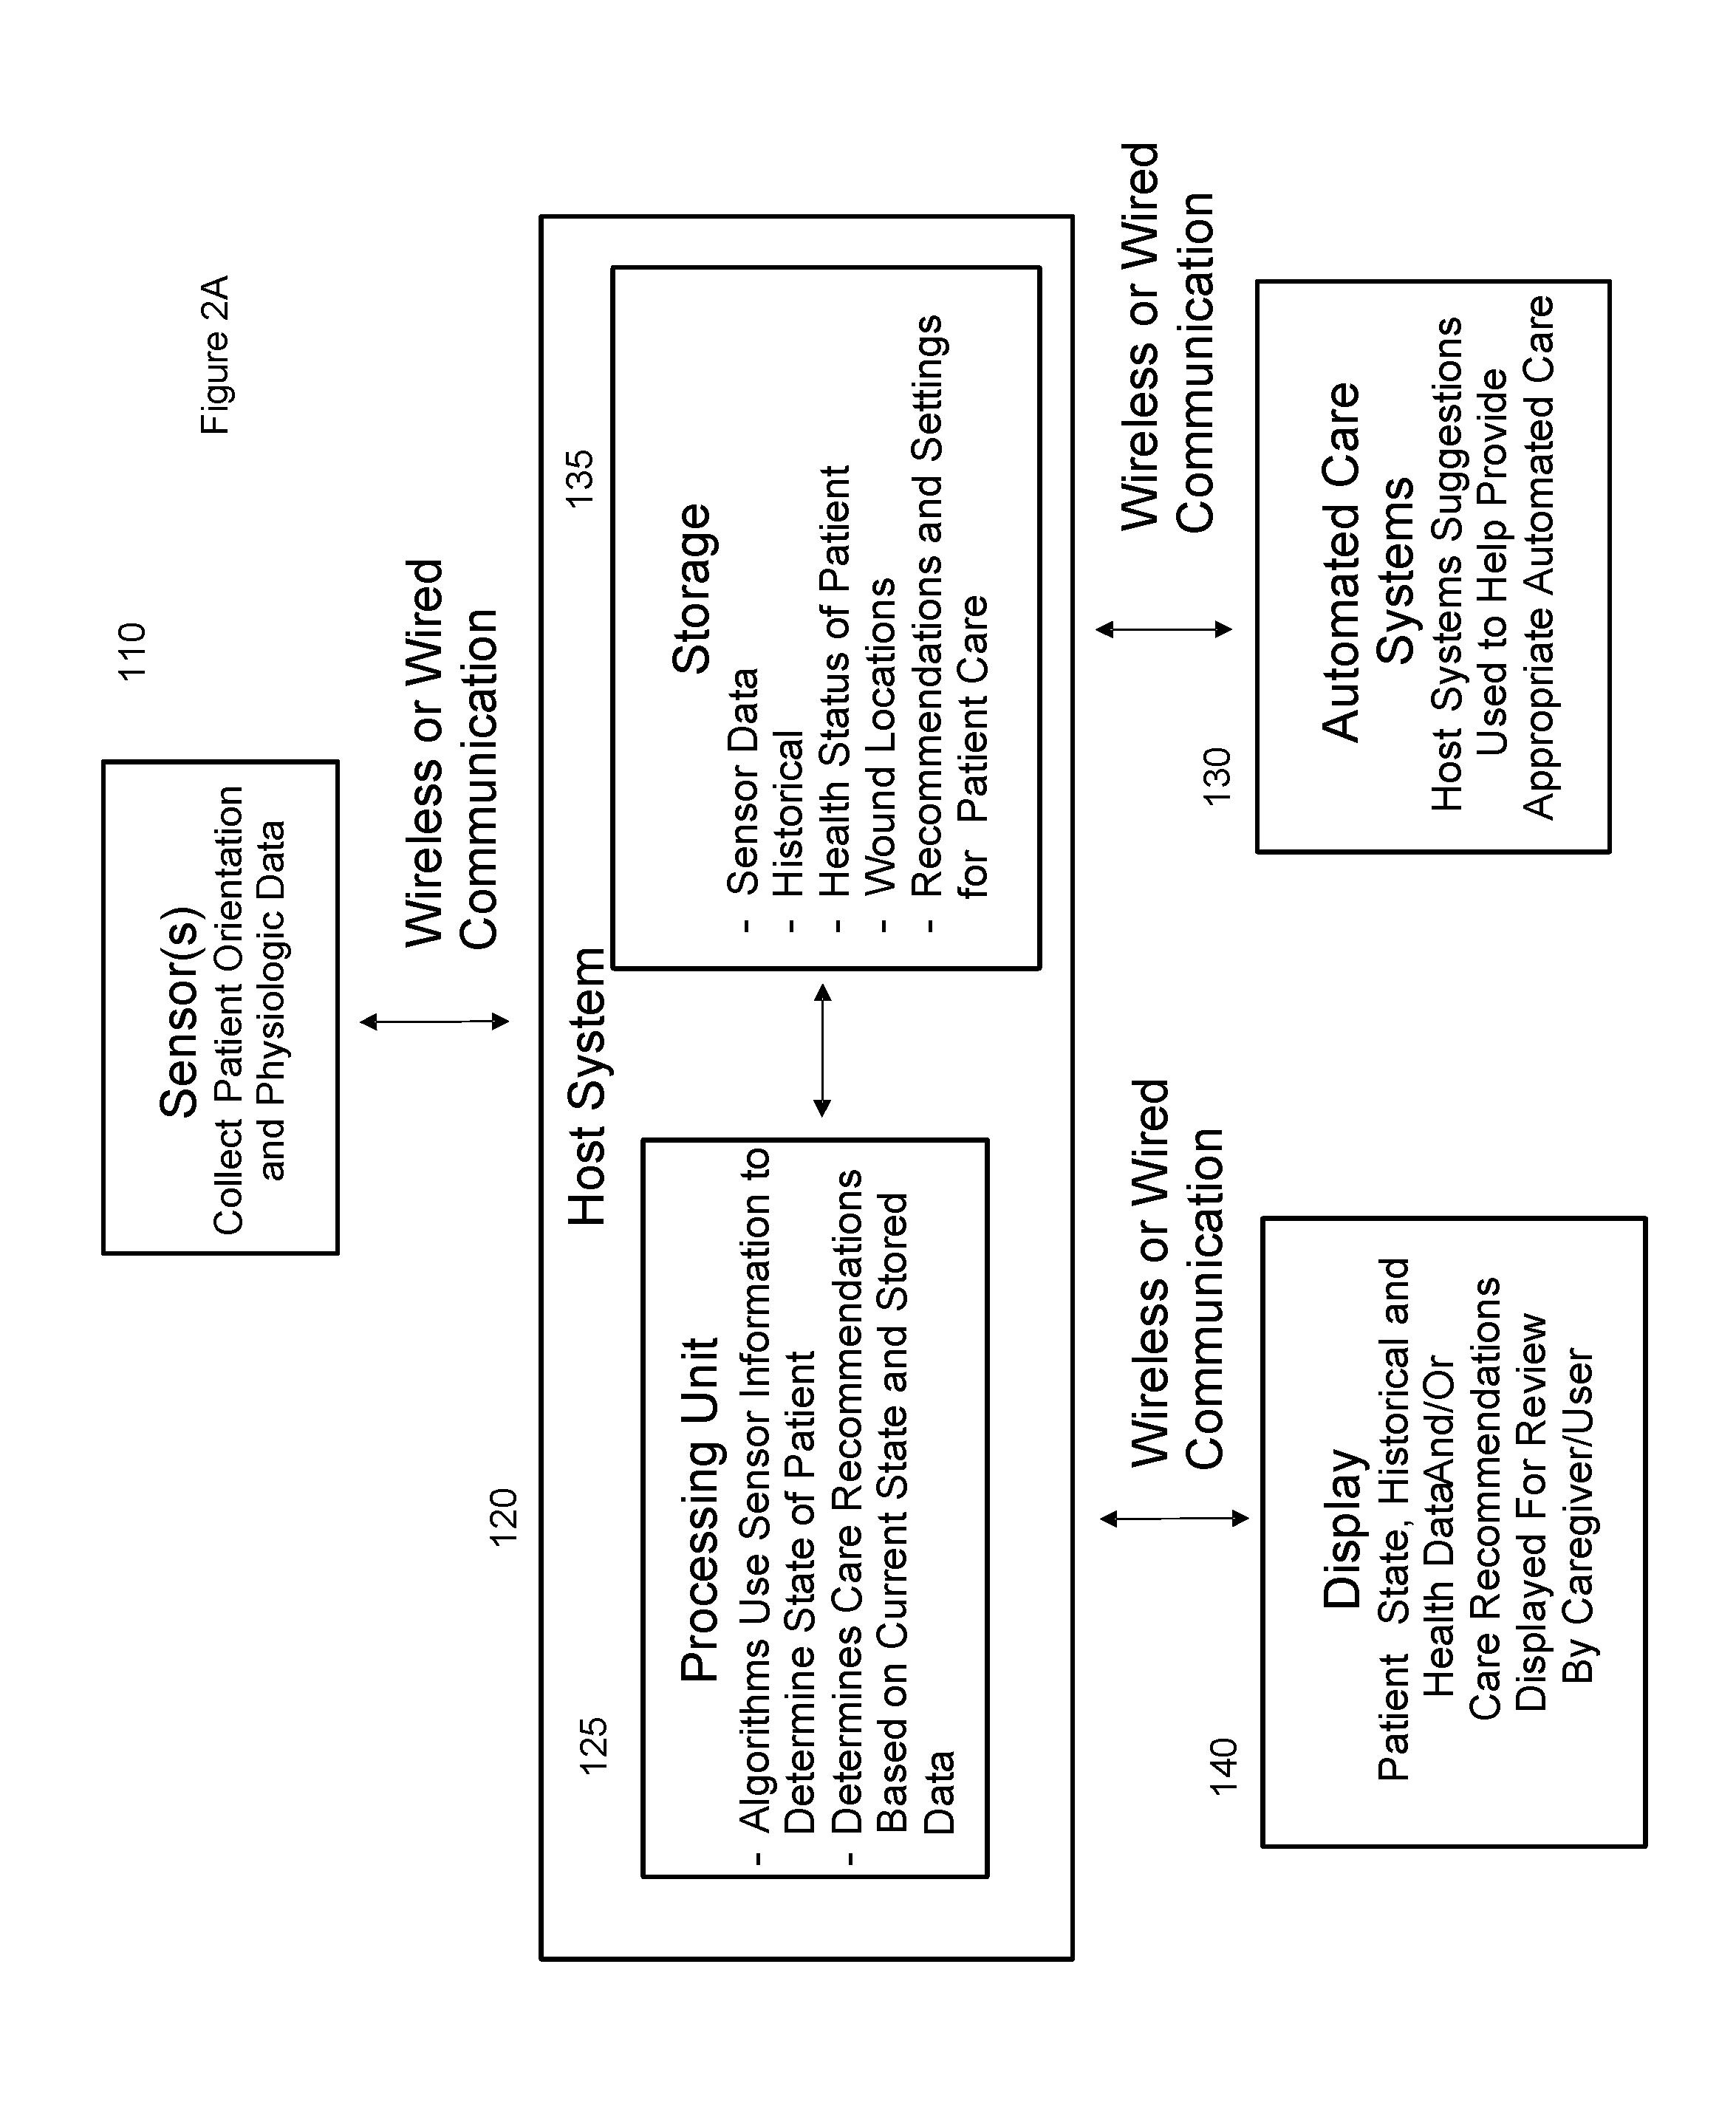 Calibrated Systems, Devices and Methods for Preventing, Detecting, and Treating Pressure-Induced Ischemia, Pressure Ulcers, Pneumonia and Other Conditions